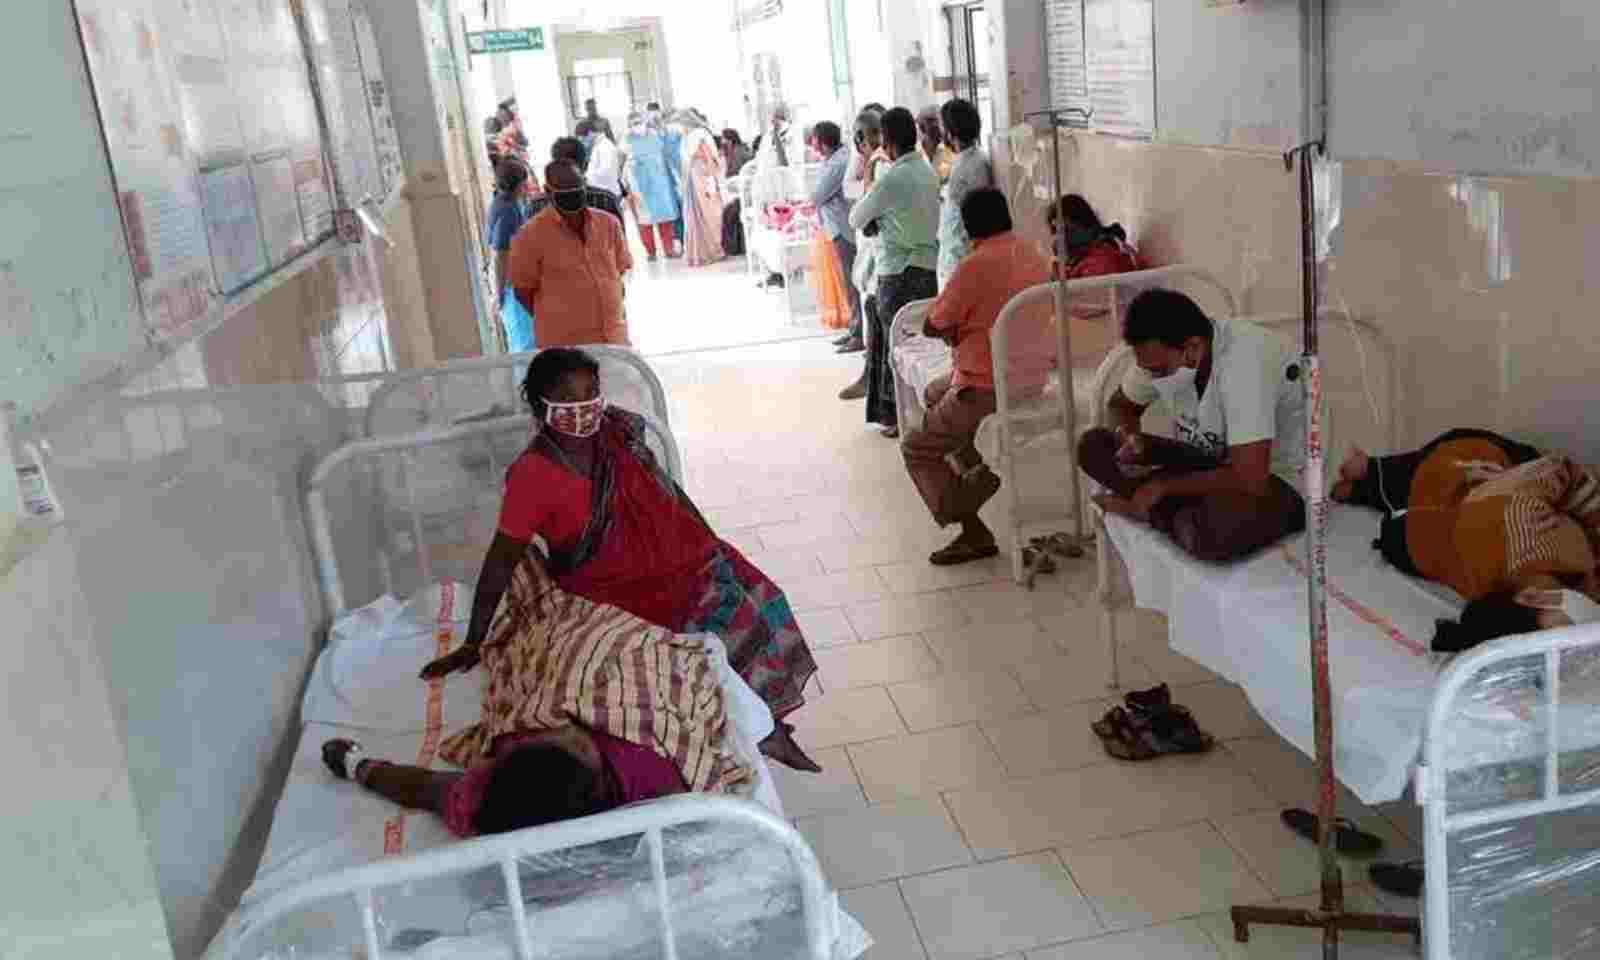 Eluru Mysterious illness update: District officials clarifies only one person died so far